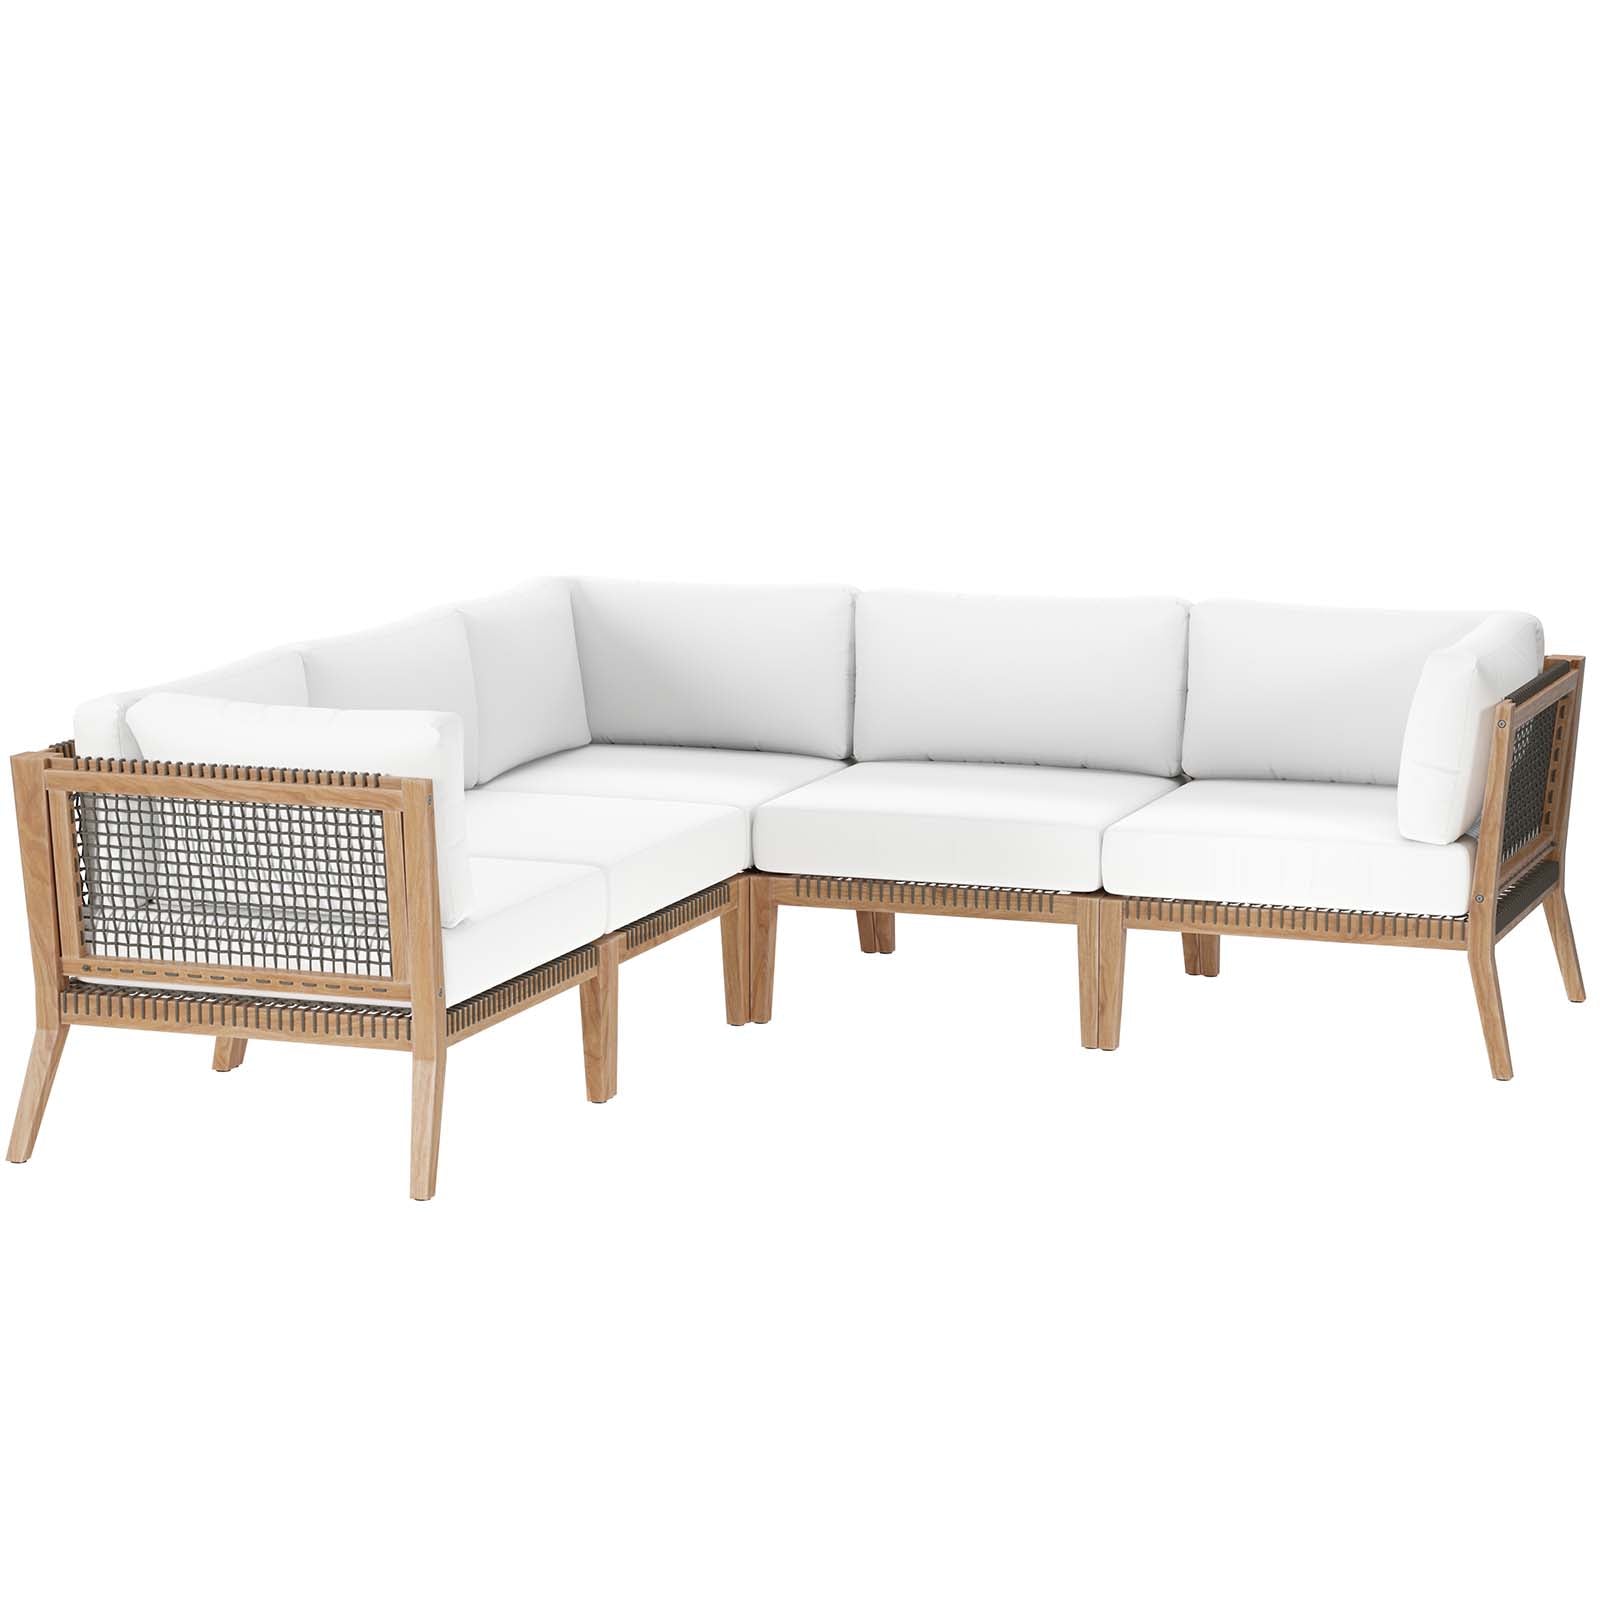 Modway Outdoor Sofas - Clearwater-Outdoor-Patio-Teak-Wood-5-Piece-Sectional-Sofa-Gray-White